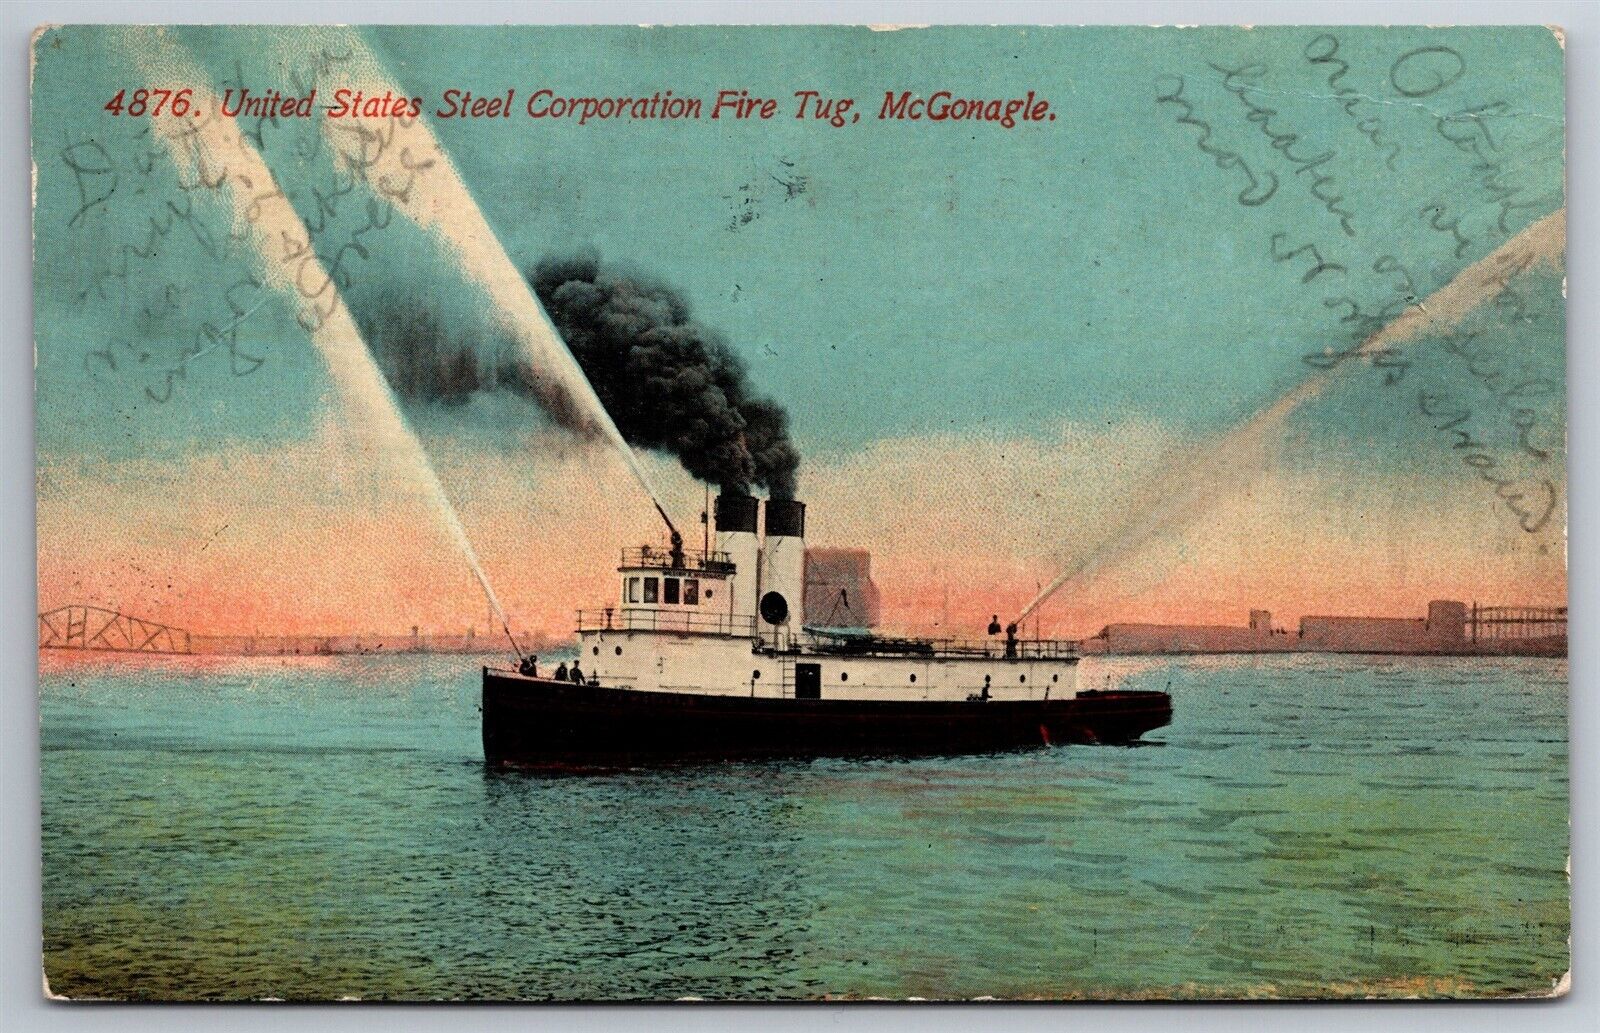 Fire Tug Boat McGonagle Fire Fighting Antique Duluth MN C1907 Postcard H3